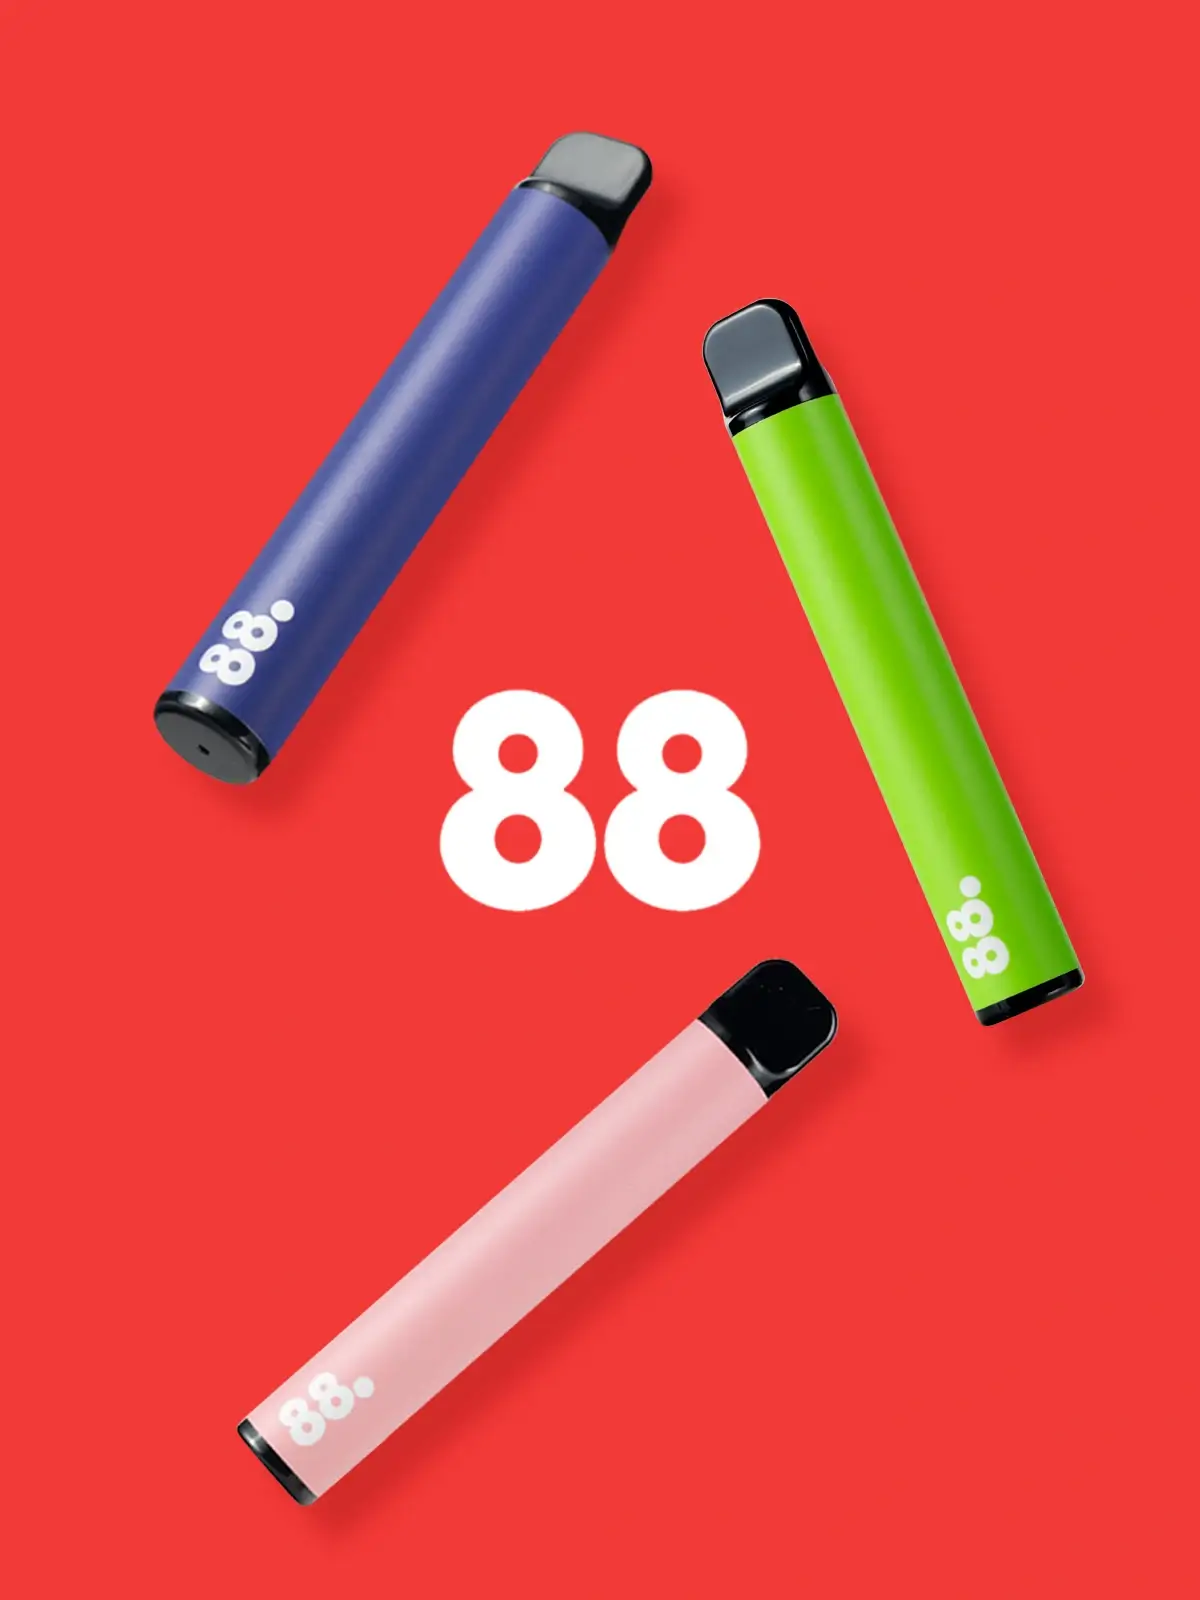 Three 88 Vape disposable vapes in front of a red background